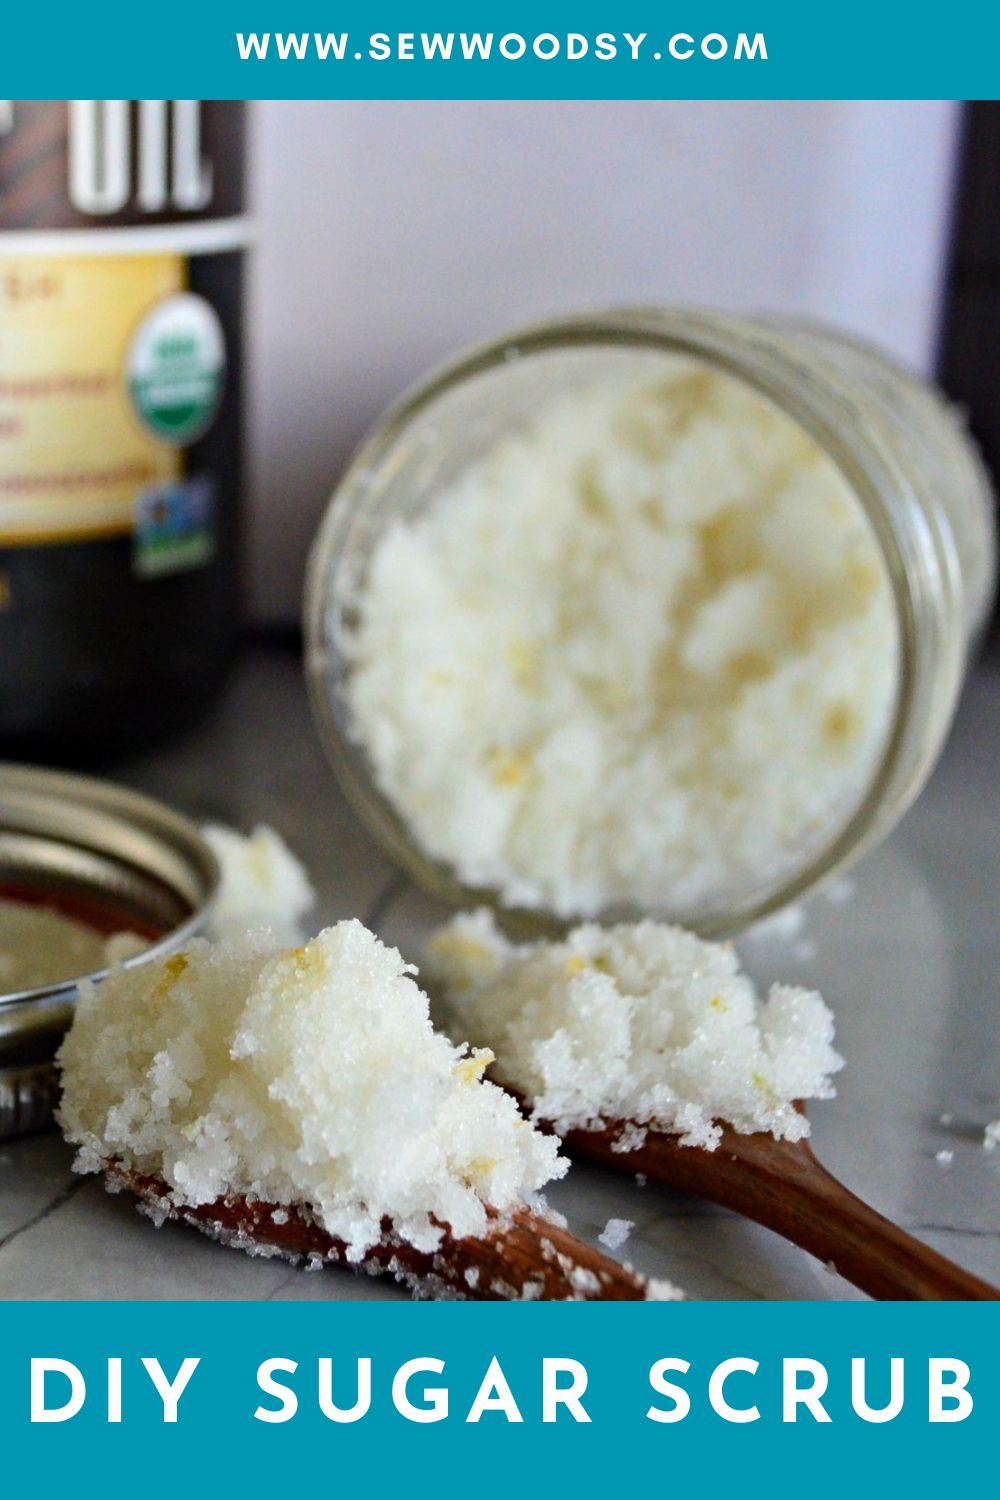 Two wooden spoons with sugar scrub on them with a jar in the background with recipe title text on image for Pinterest.